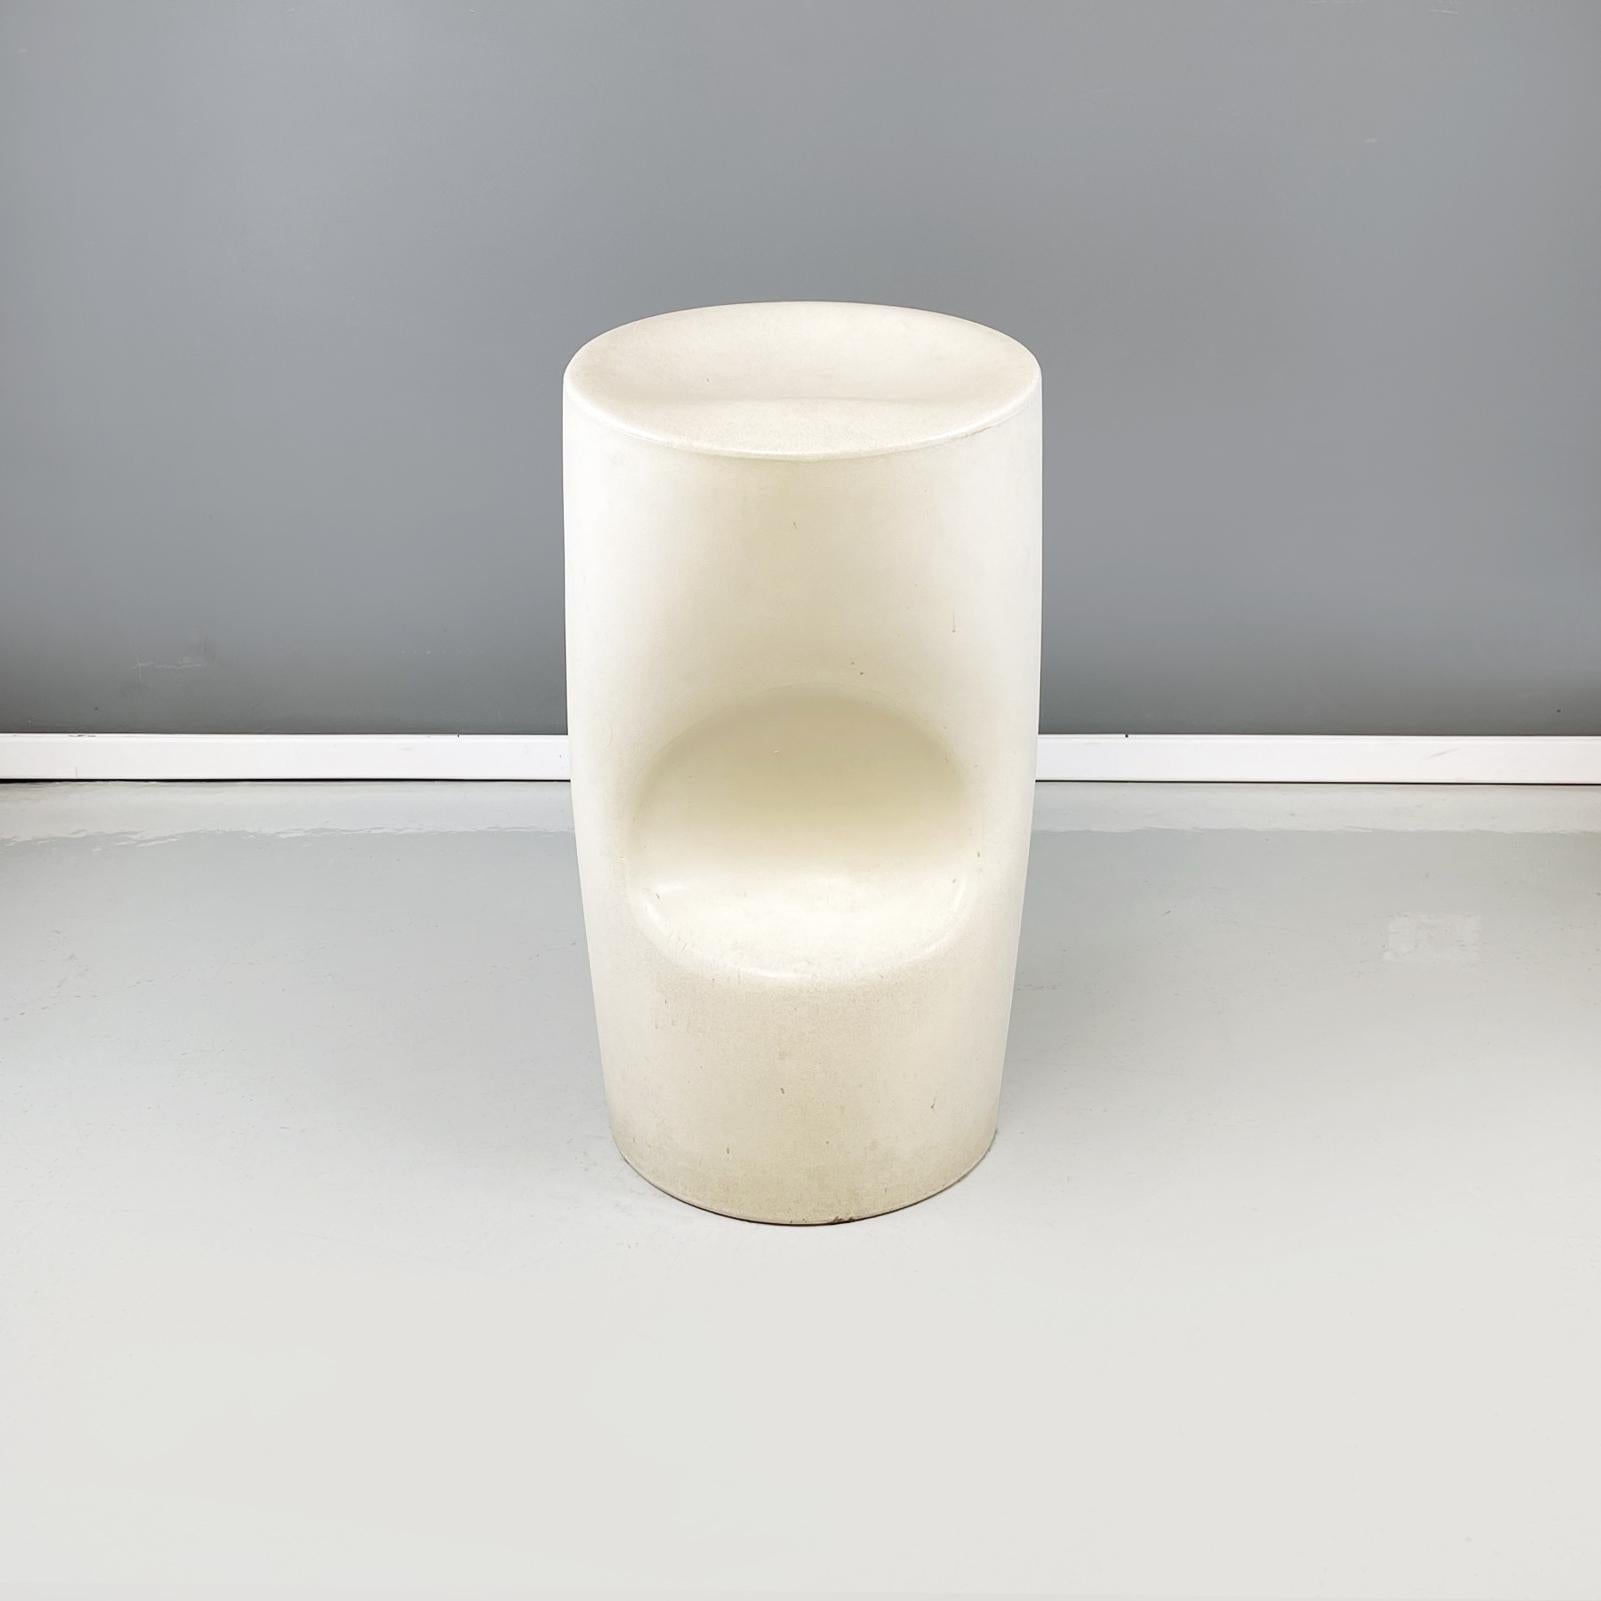 Italian space age Post Modern White Plastic Stool Tokyo Pop with Footres by Tokujin Yoshioka for Driade, 2000s
Stool mod. Tokyo Pop with a round base in white plastic with a matte finish. The structure has a soft and rounded silhouette. Footrest